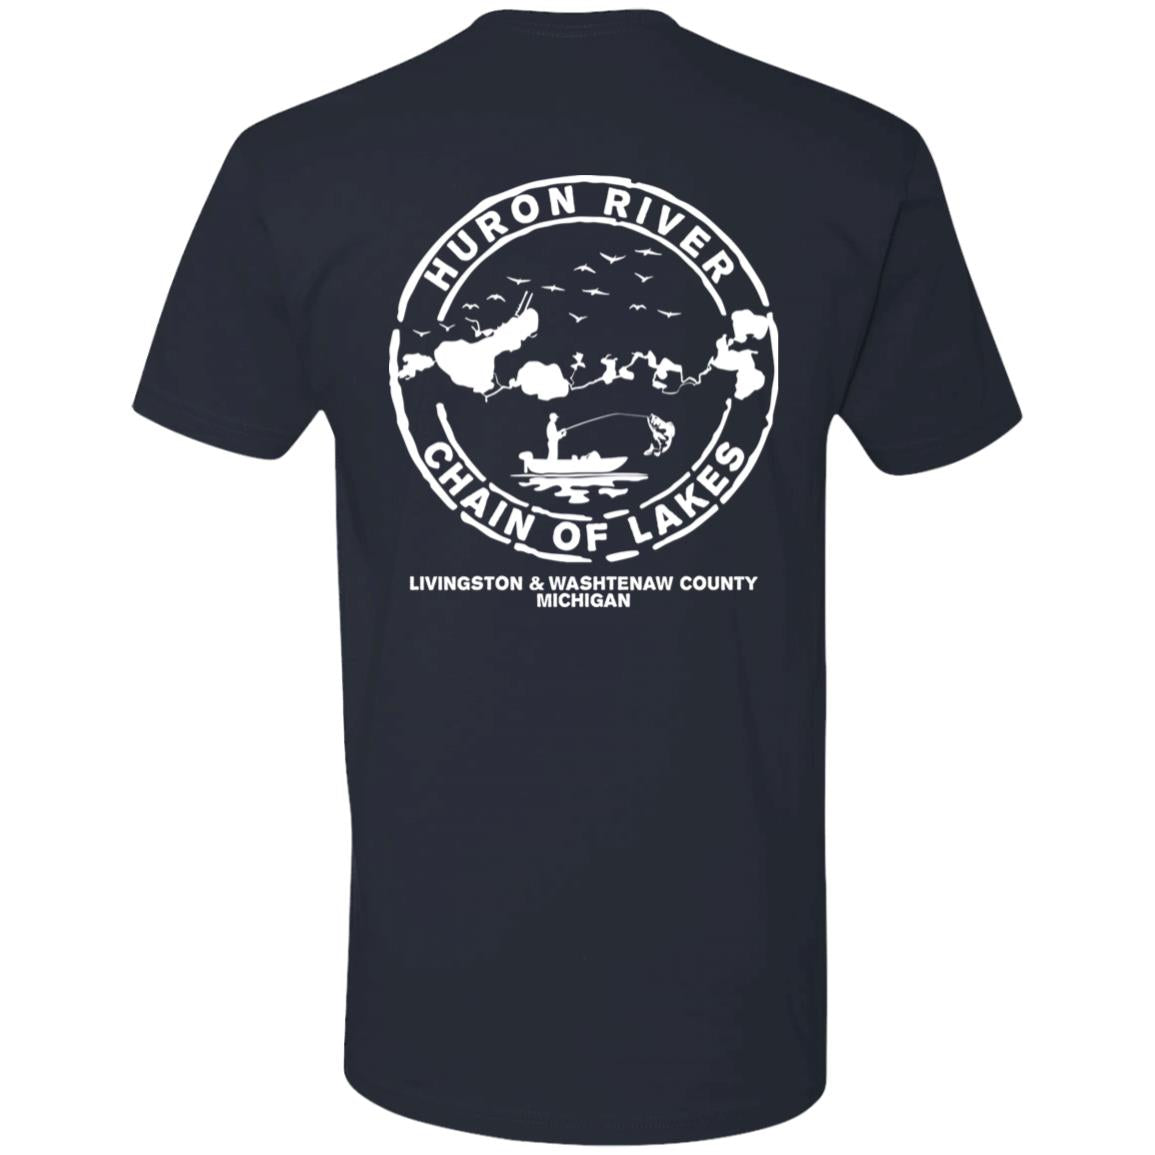 HRCL FL - Boat.... Bust Out Another Thousand - 2 Sided NL3600 Premium Short Sleeve T-Shirt